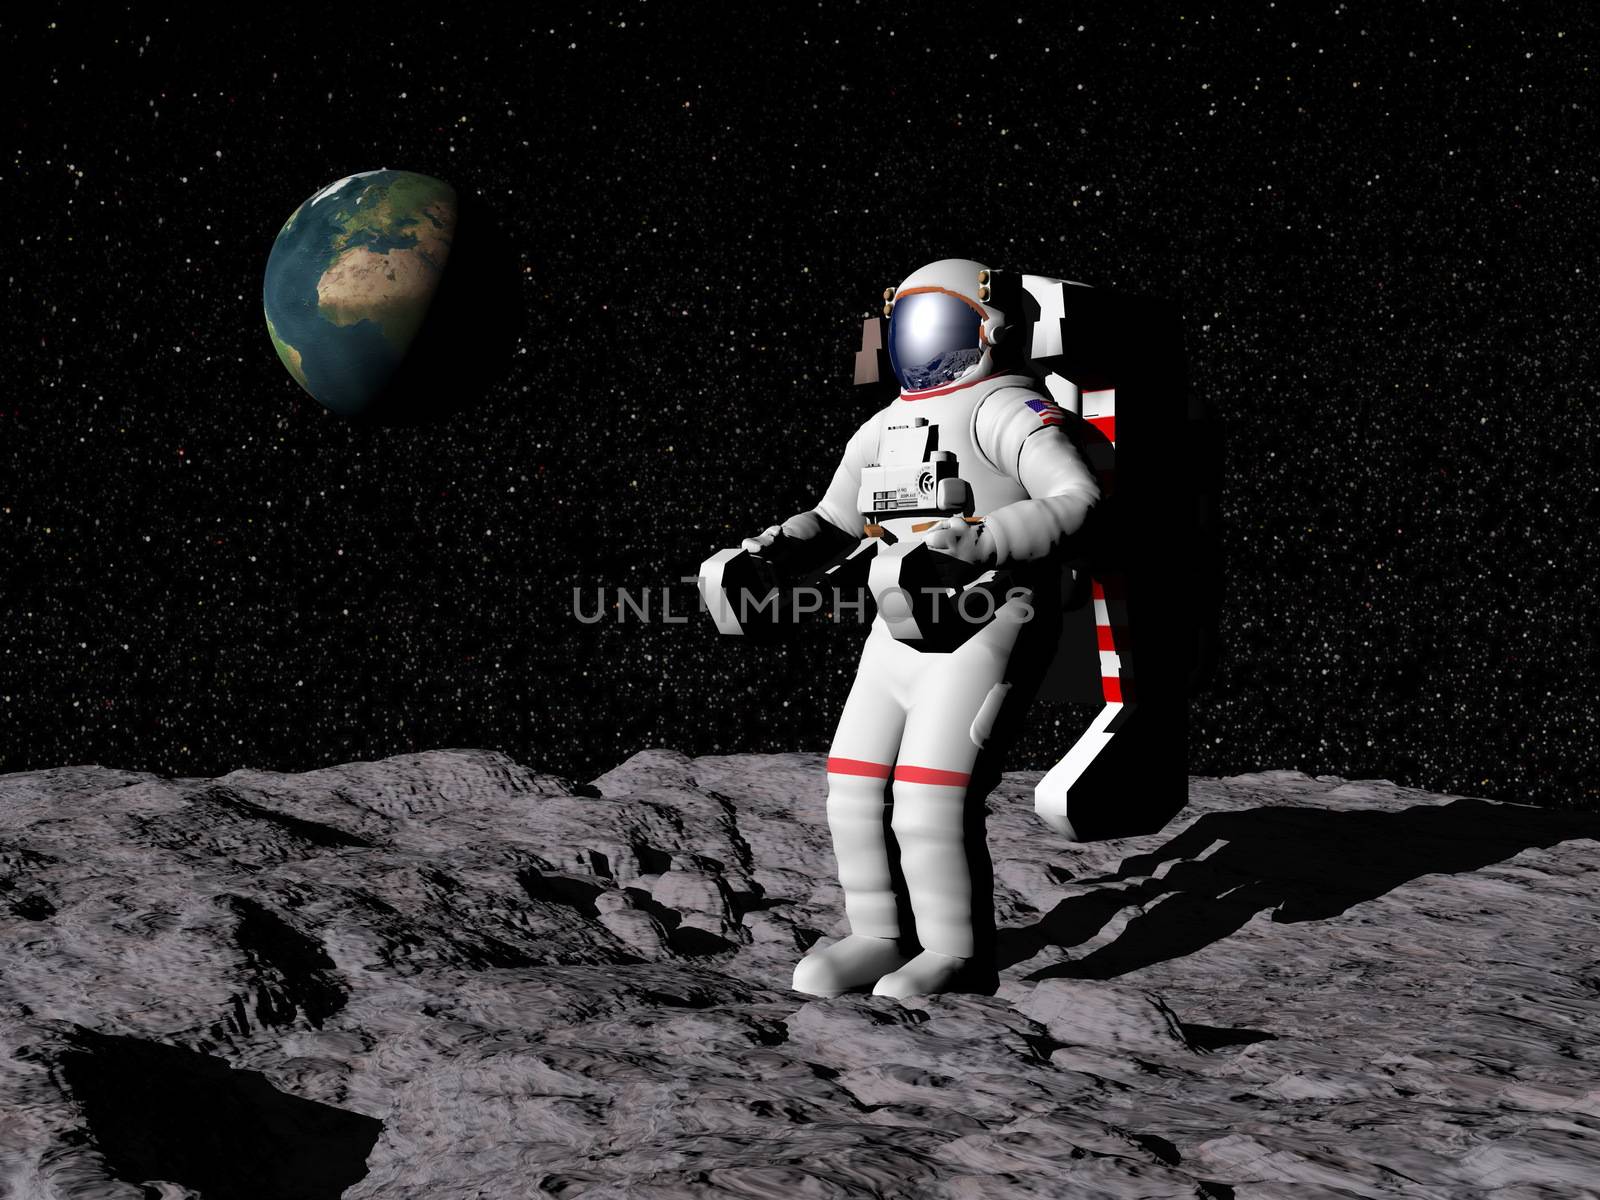 Astronaut on moon with earth in the background - Elements of this image furnished by NASA